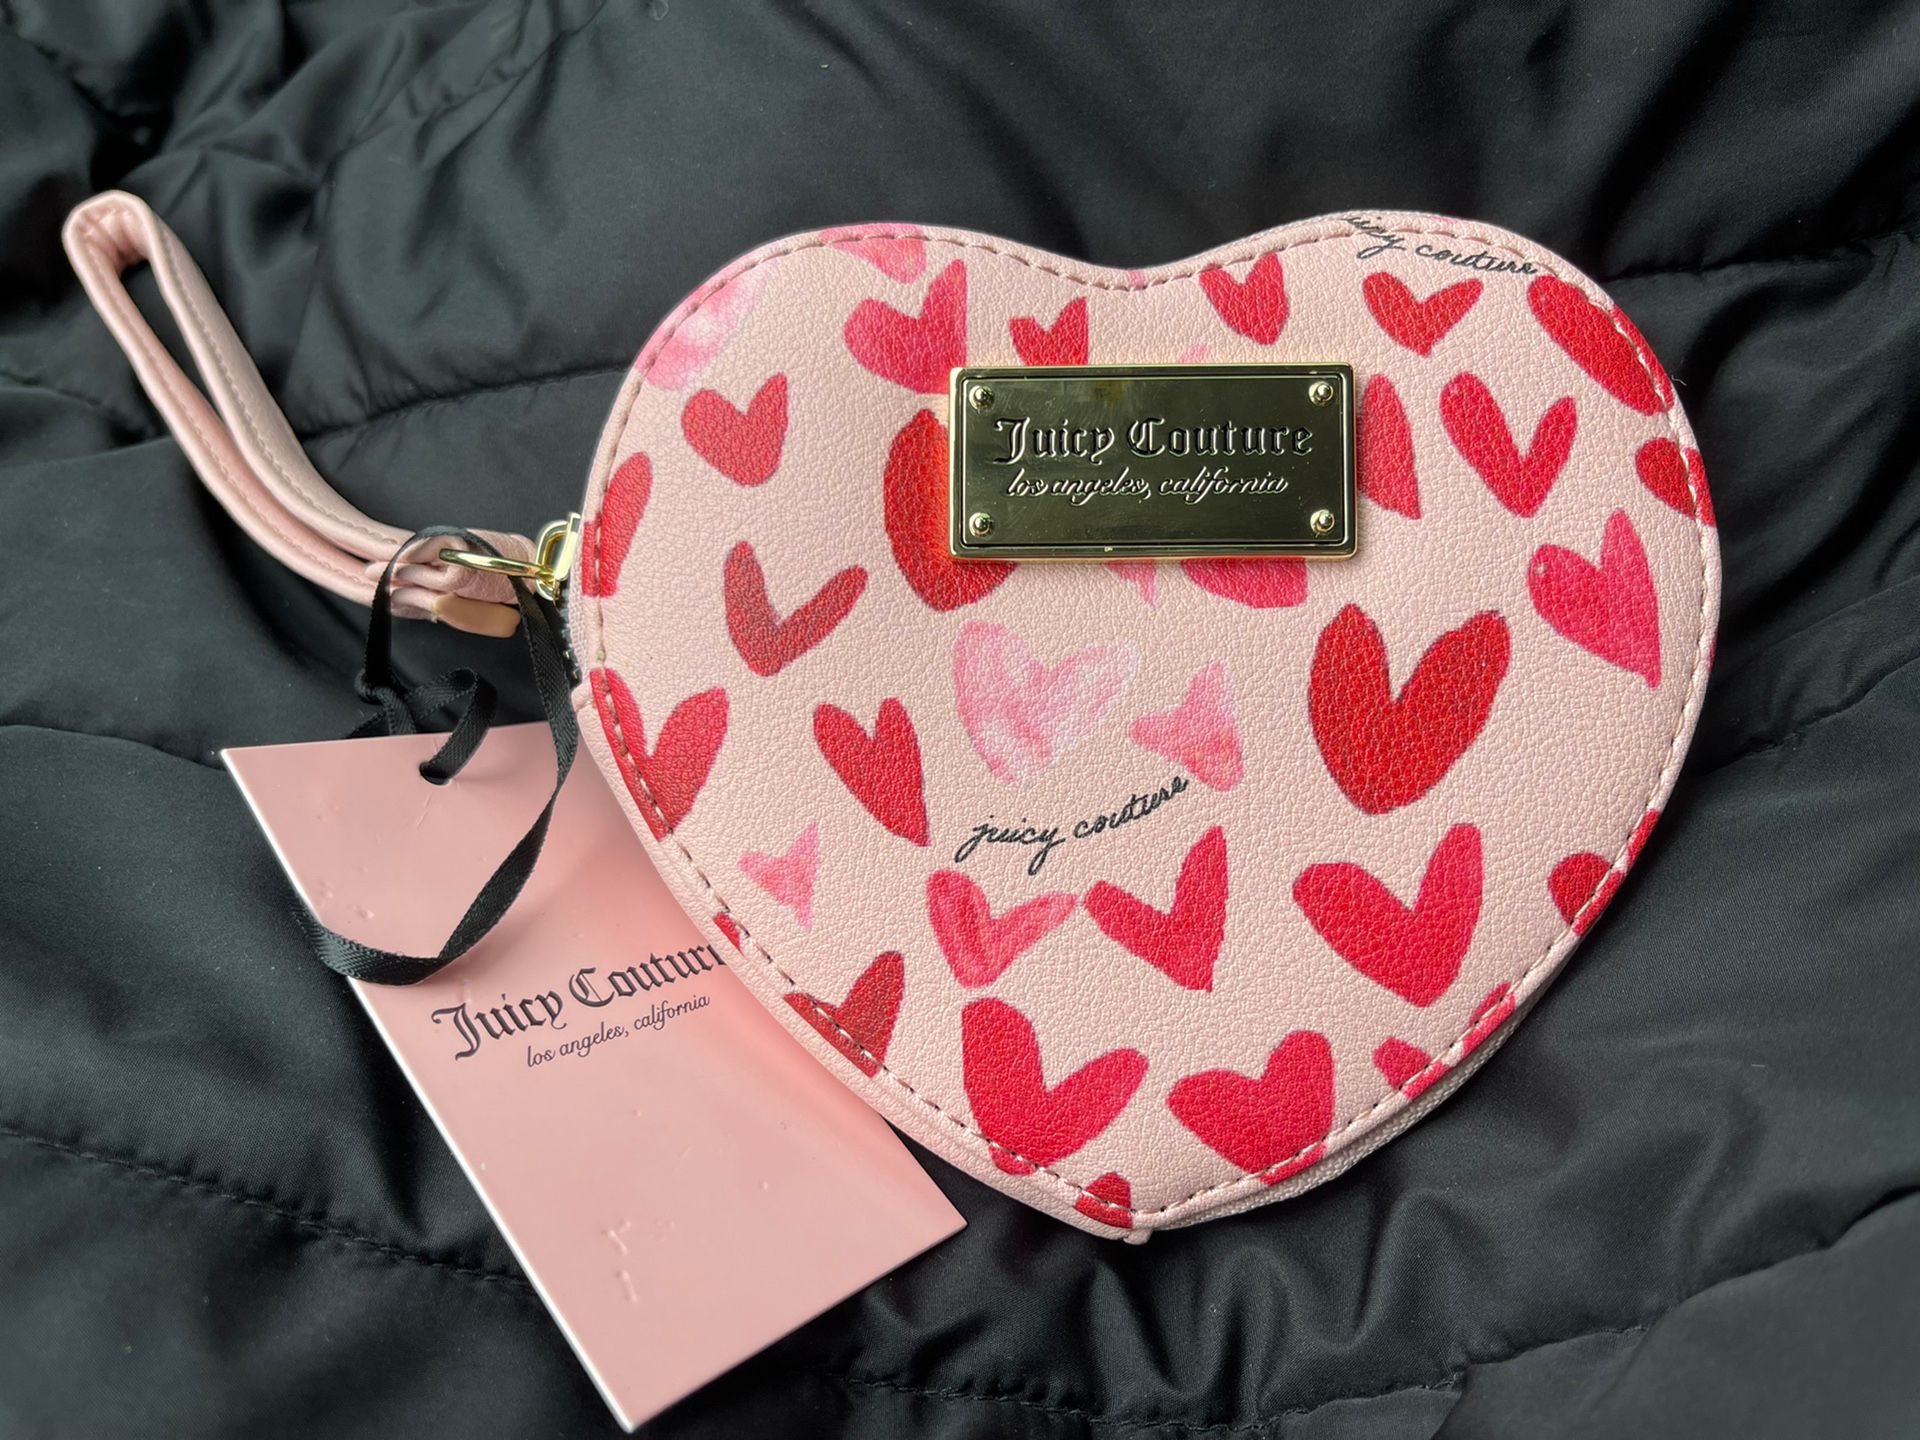 Juicy Couture Heart Shaped Coin Purse for Sale in Austin, TX - OfferUp